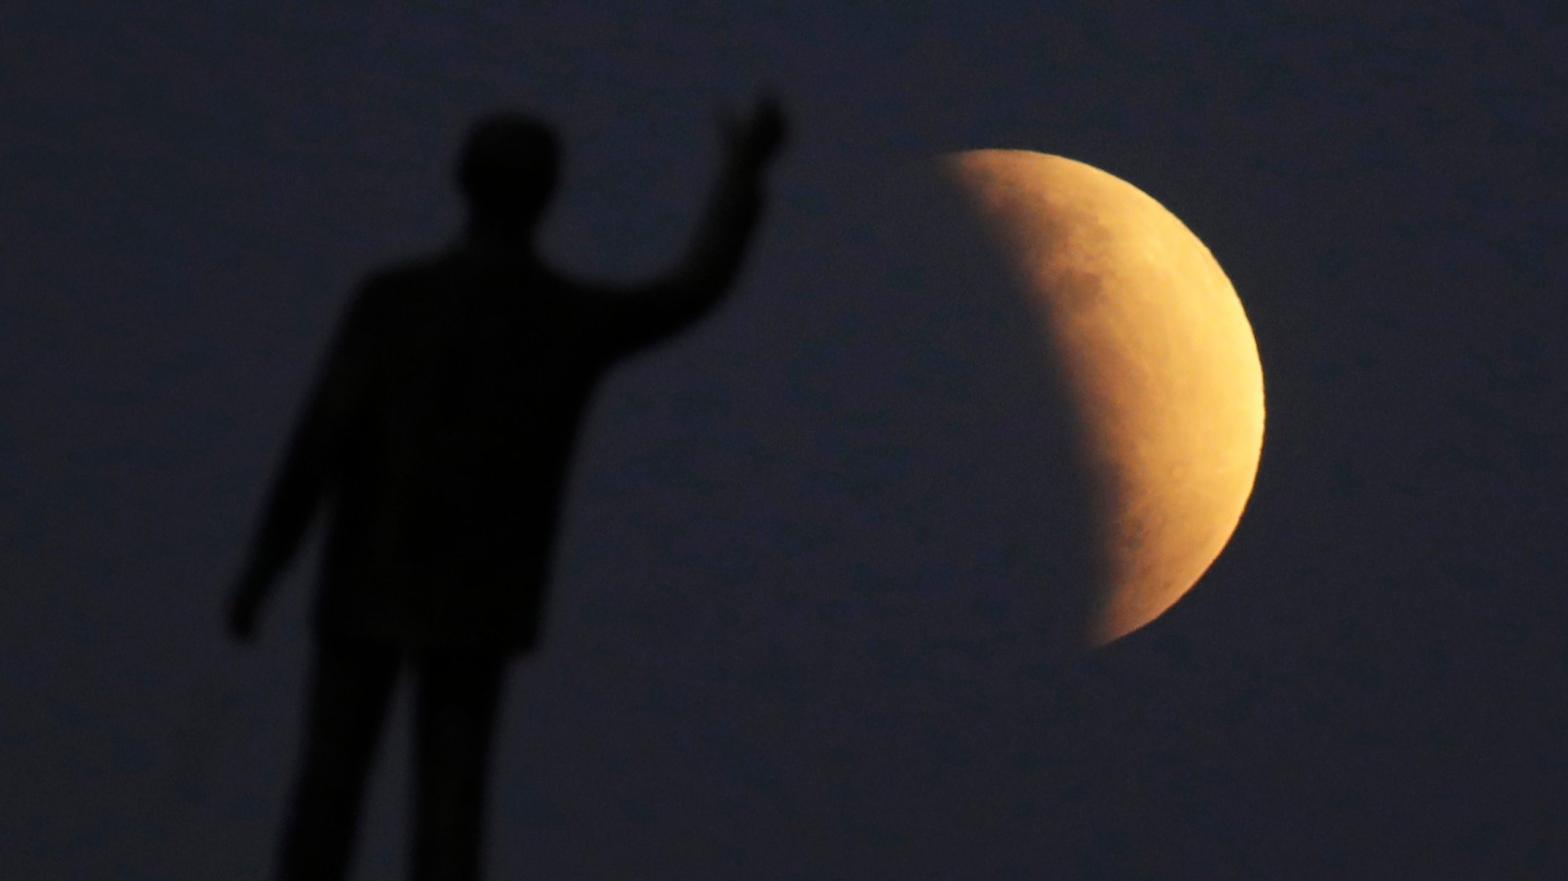 The partial lunar eclipse of July 16, 2019 as seen in Brazil, with a statue in the foreground.  (Photo: Eraldo Peres, AP)